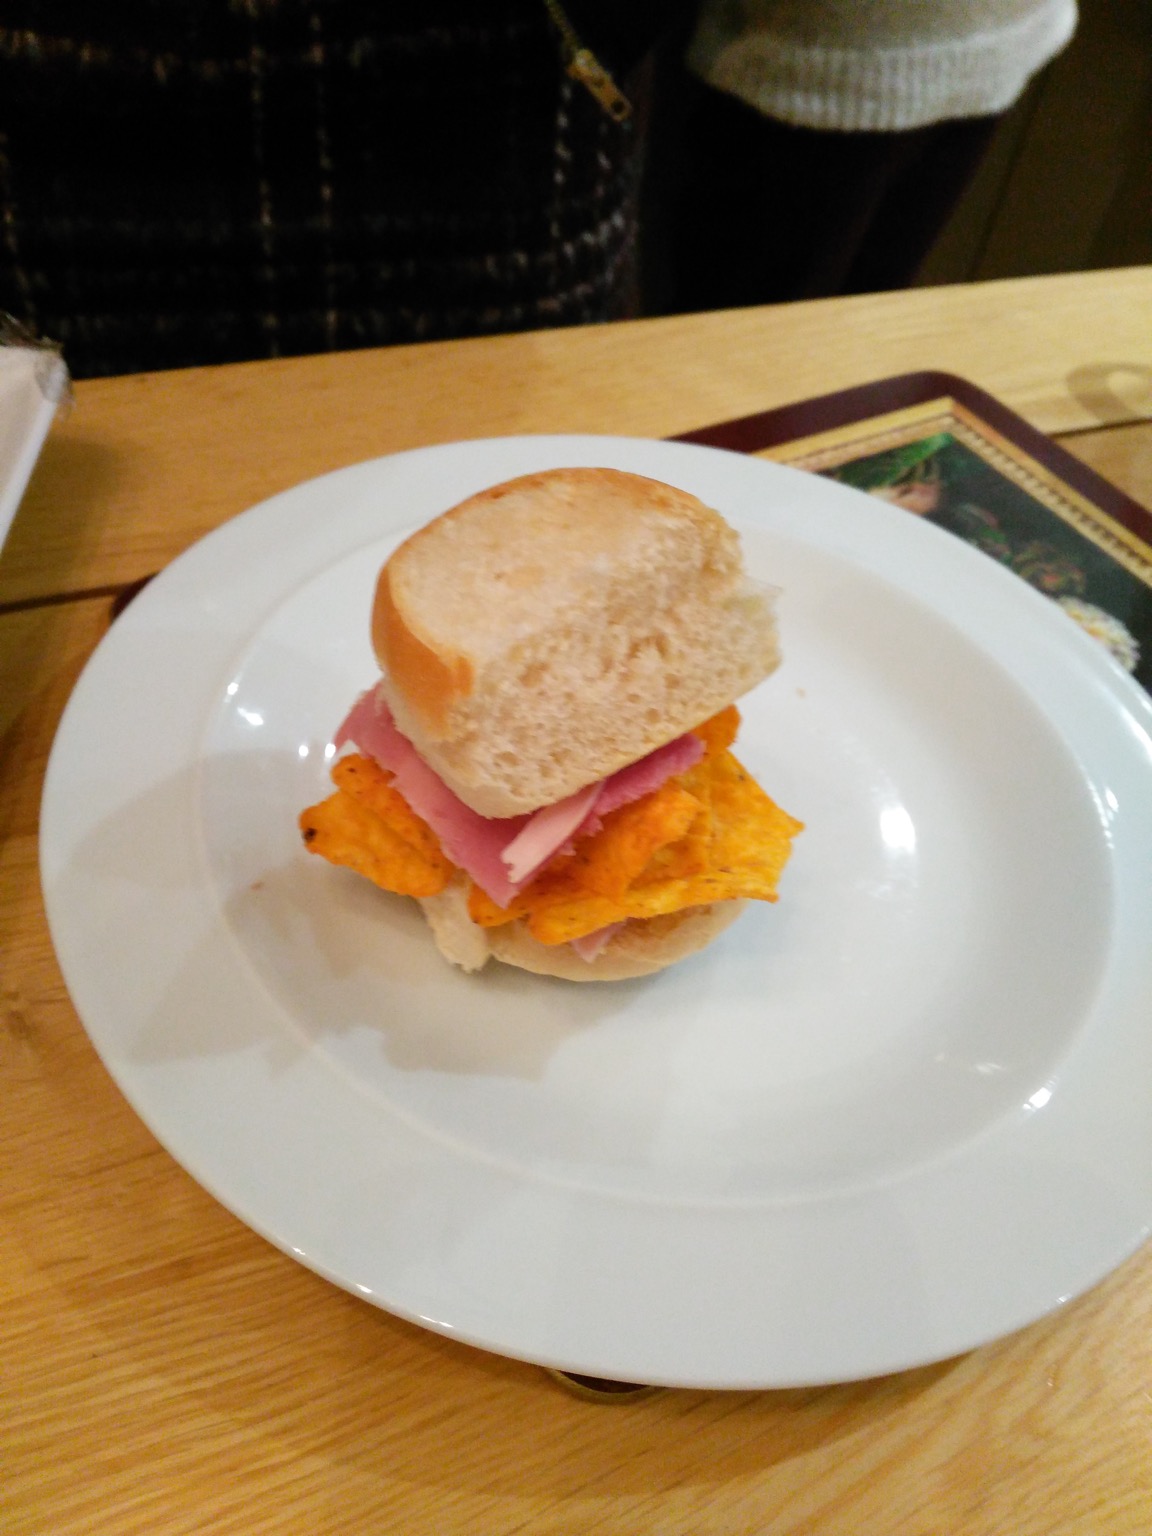 Dainty white roll containing ham and Doritos